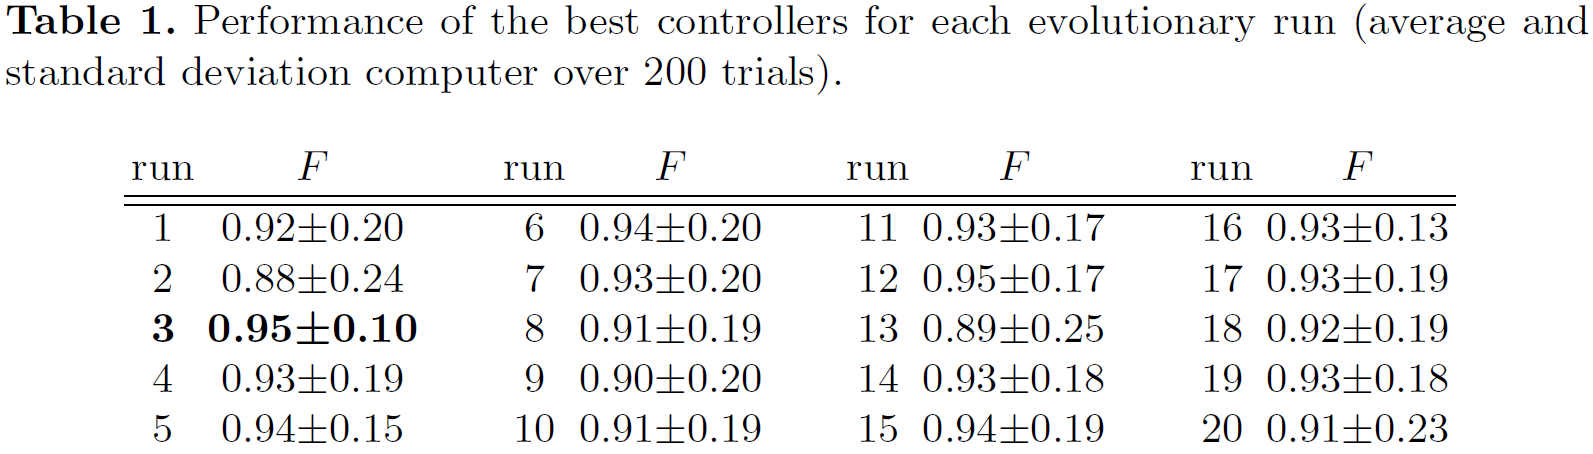 Performance of the best controllers for each evolutionary run (average and stardard deviation over 200 trials)